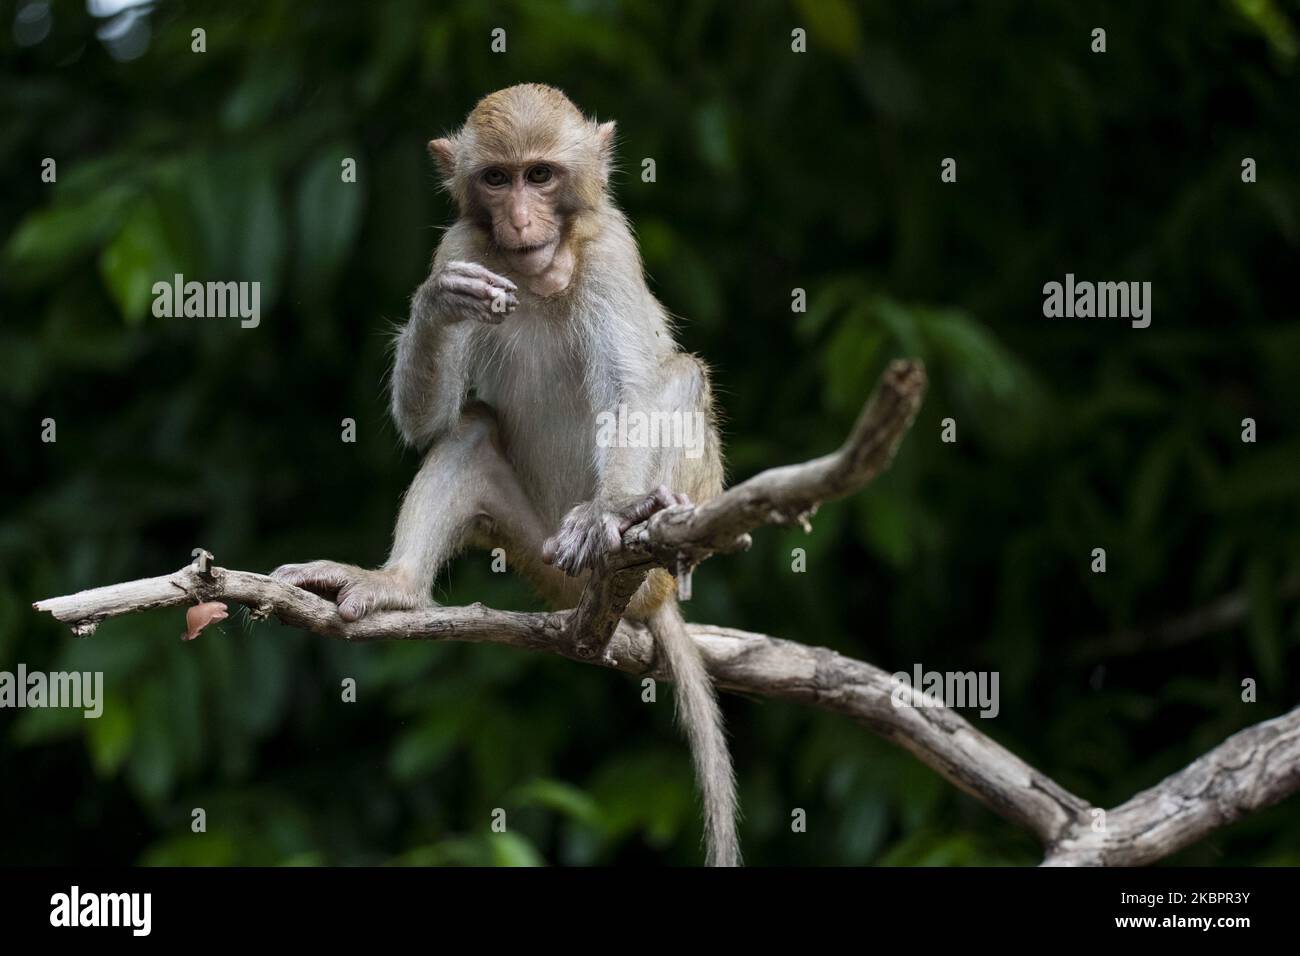 A rhesus monkey is seen at Hlawga National Park on the United Nations' World Environment Day, on the outskirts of Yangon on June 5, 2020. World Environment Day, which encourages worldwide awareness and action for the protection of the environment. The theme for this year is “Biodiversity”. Hlawga National Park was created as an environmental education center in 1982. It is home to 25 species of mammals, 9 species of reptiles, 54 species of amphibians, 192 species of birds, 103 species of butterfly and 23 species of fish. (Photo by Shwe Paw Mya Tin/NurPhoto) Stock Photo